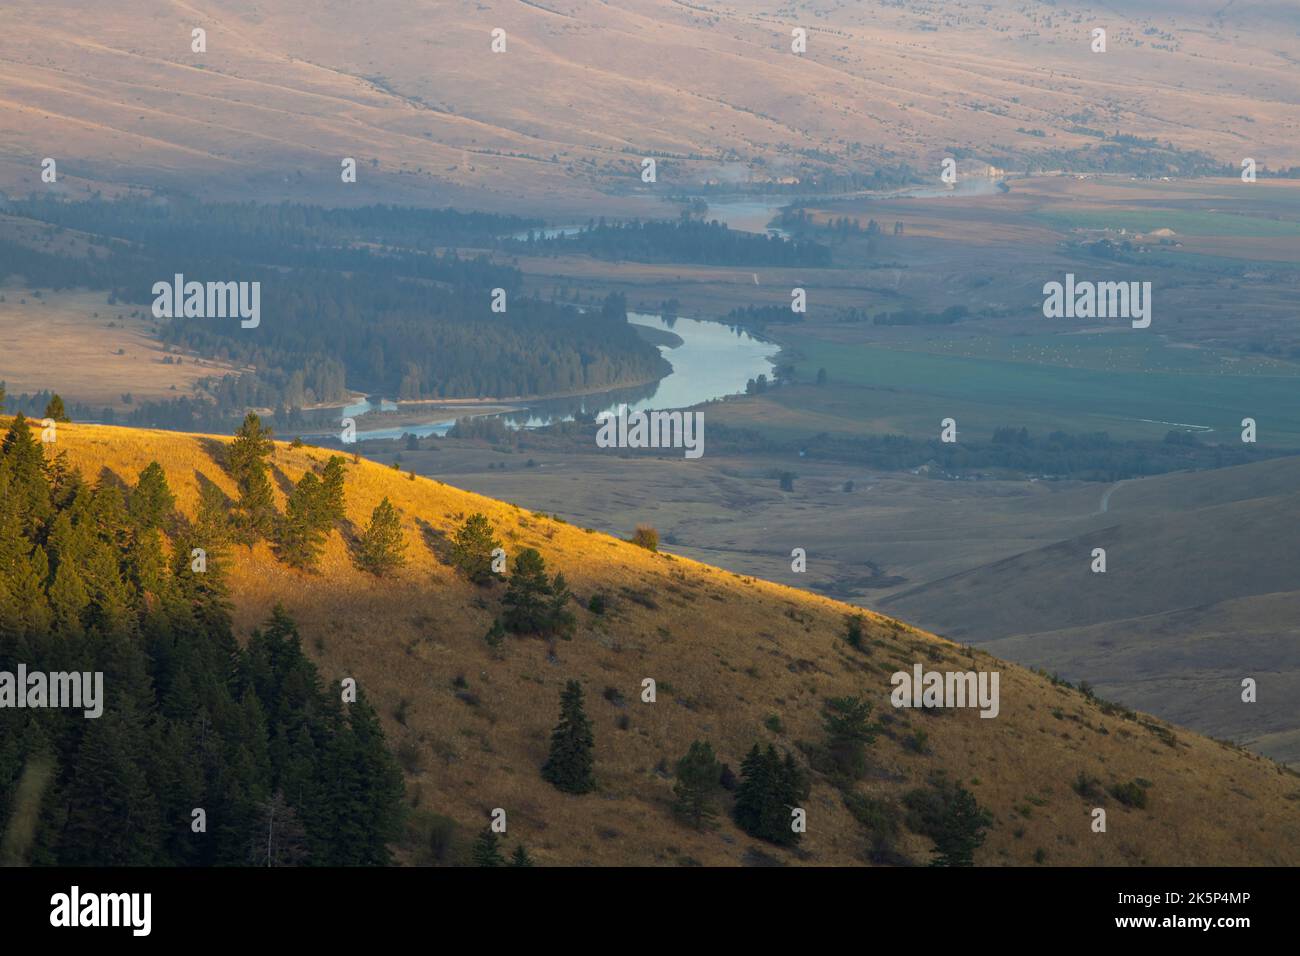 View fromthe Loop Road in the National Bison Range, Montana with the Flathead River in the distance. Stock Photo